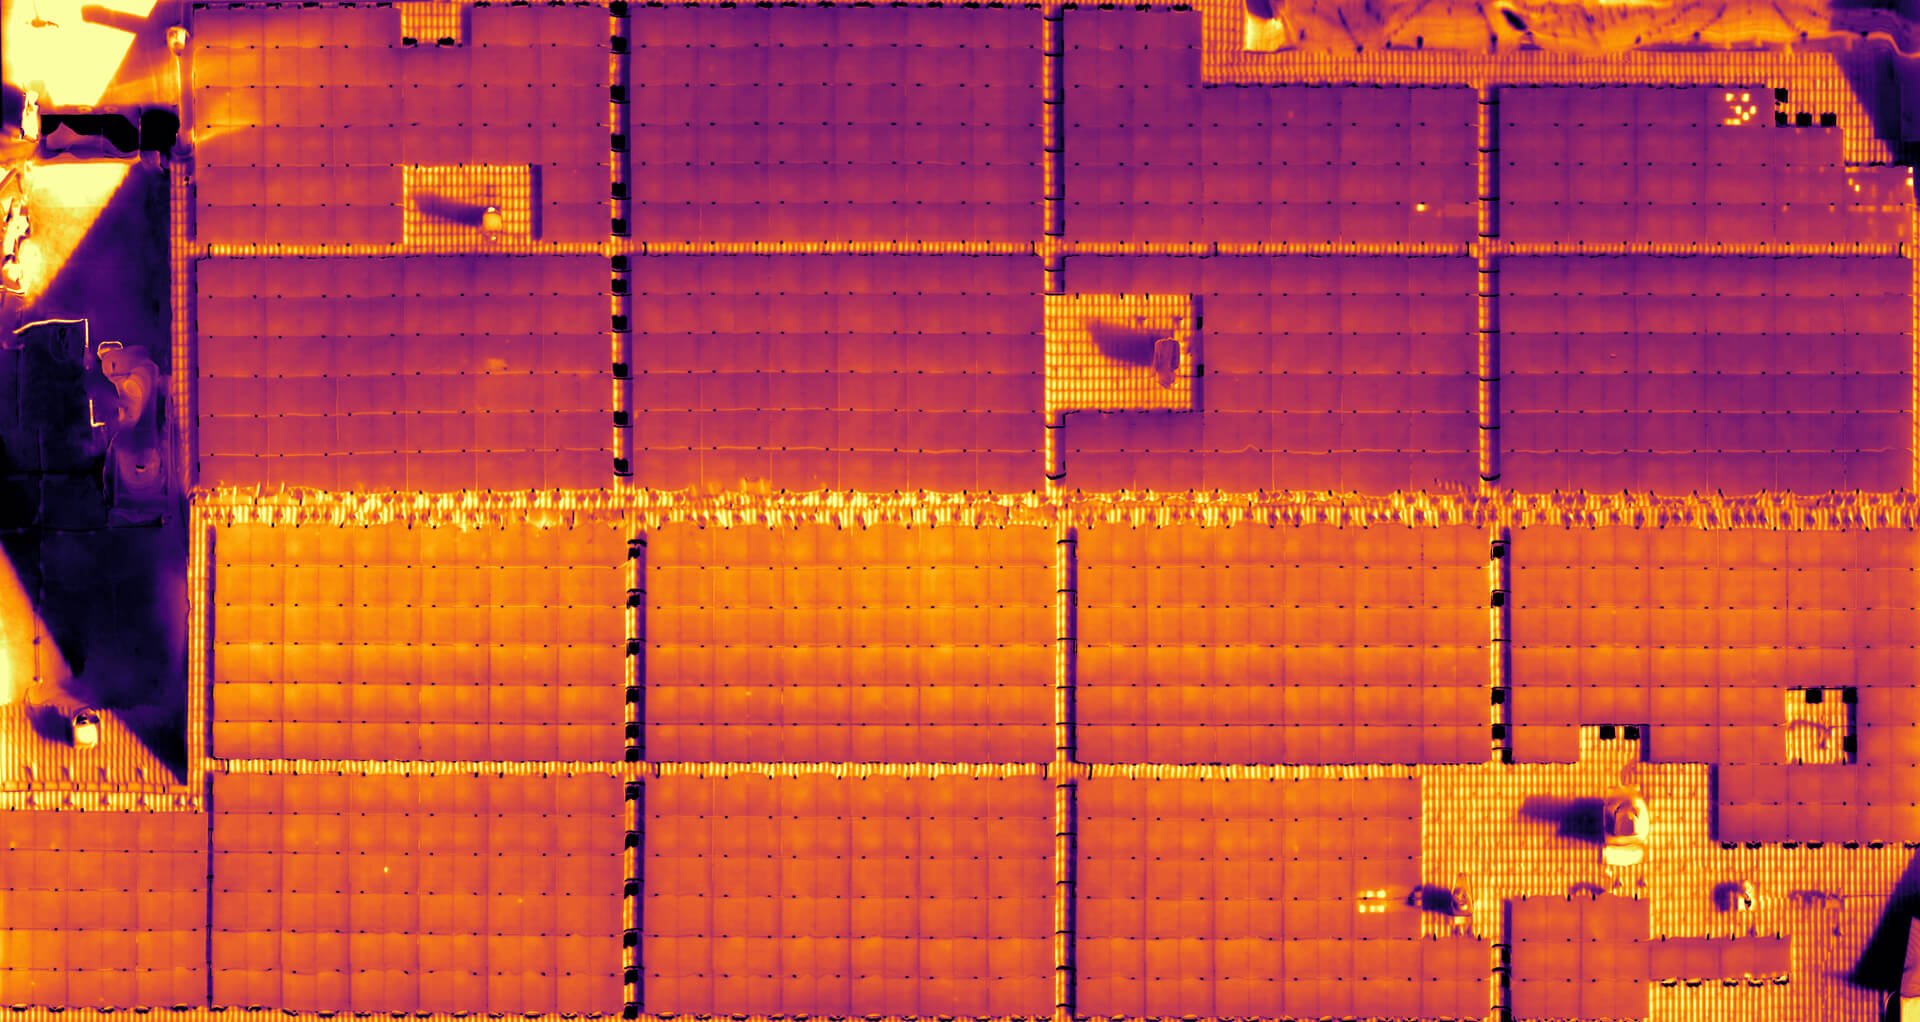 Photovoltaic inspection with thermal imaging drone - Radiometric